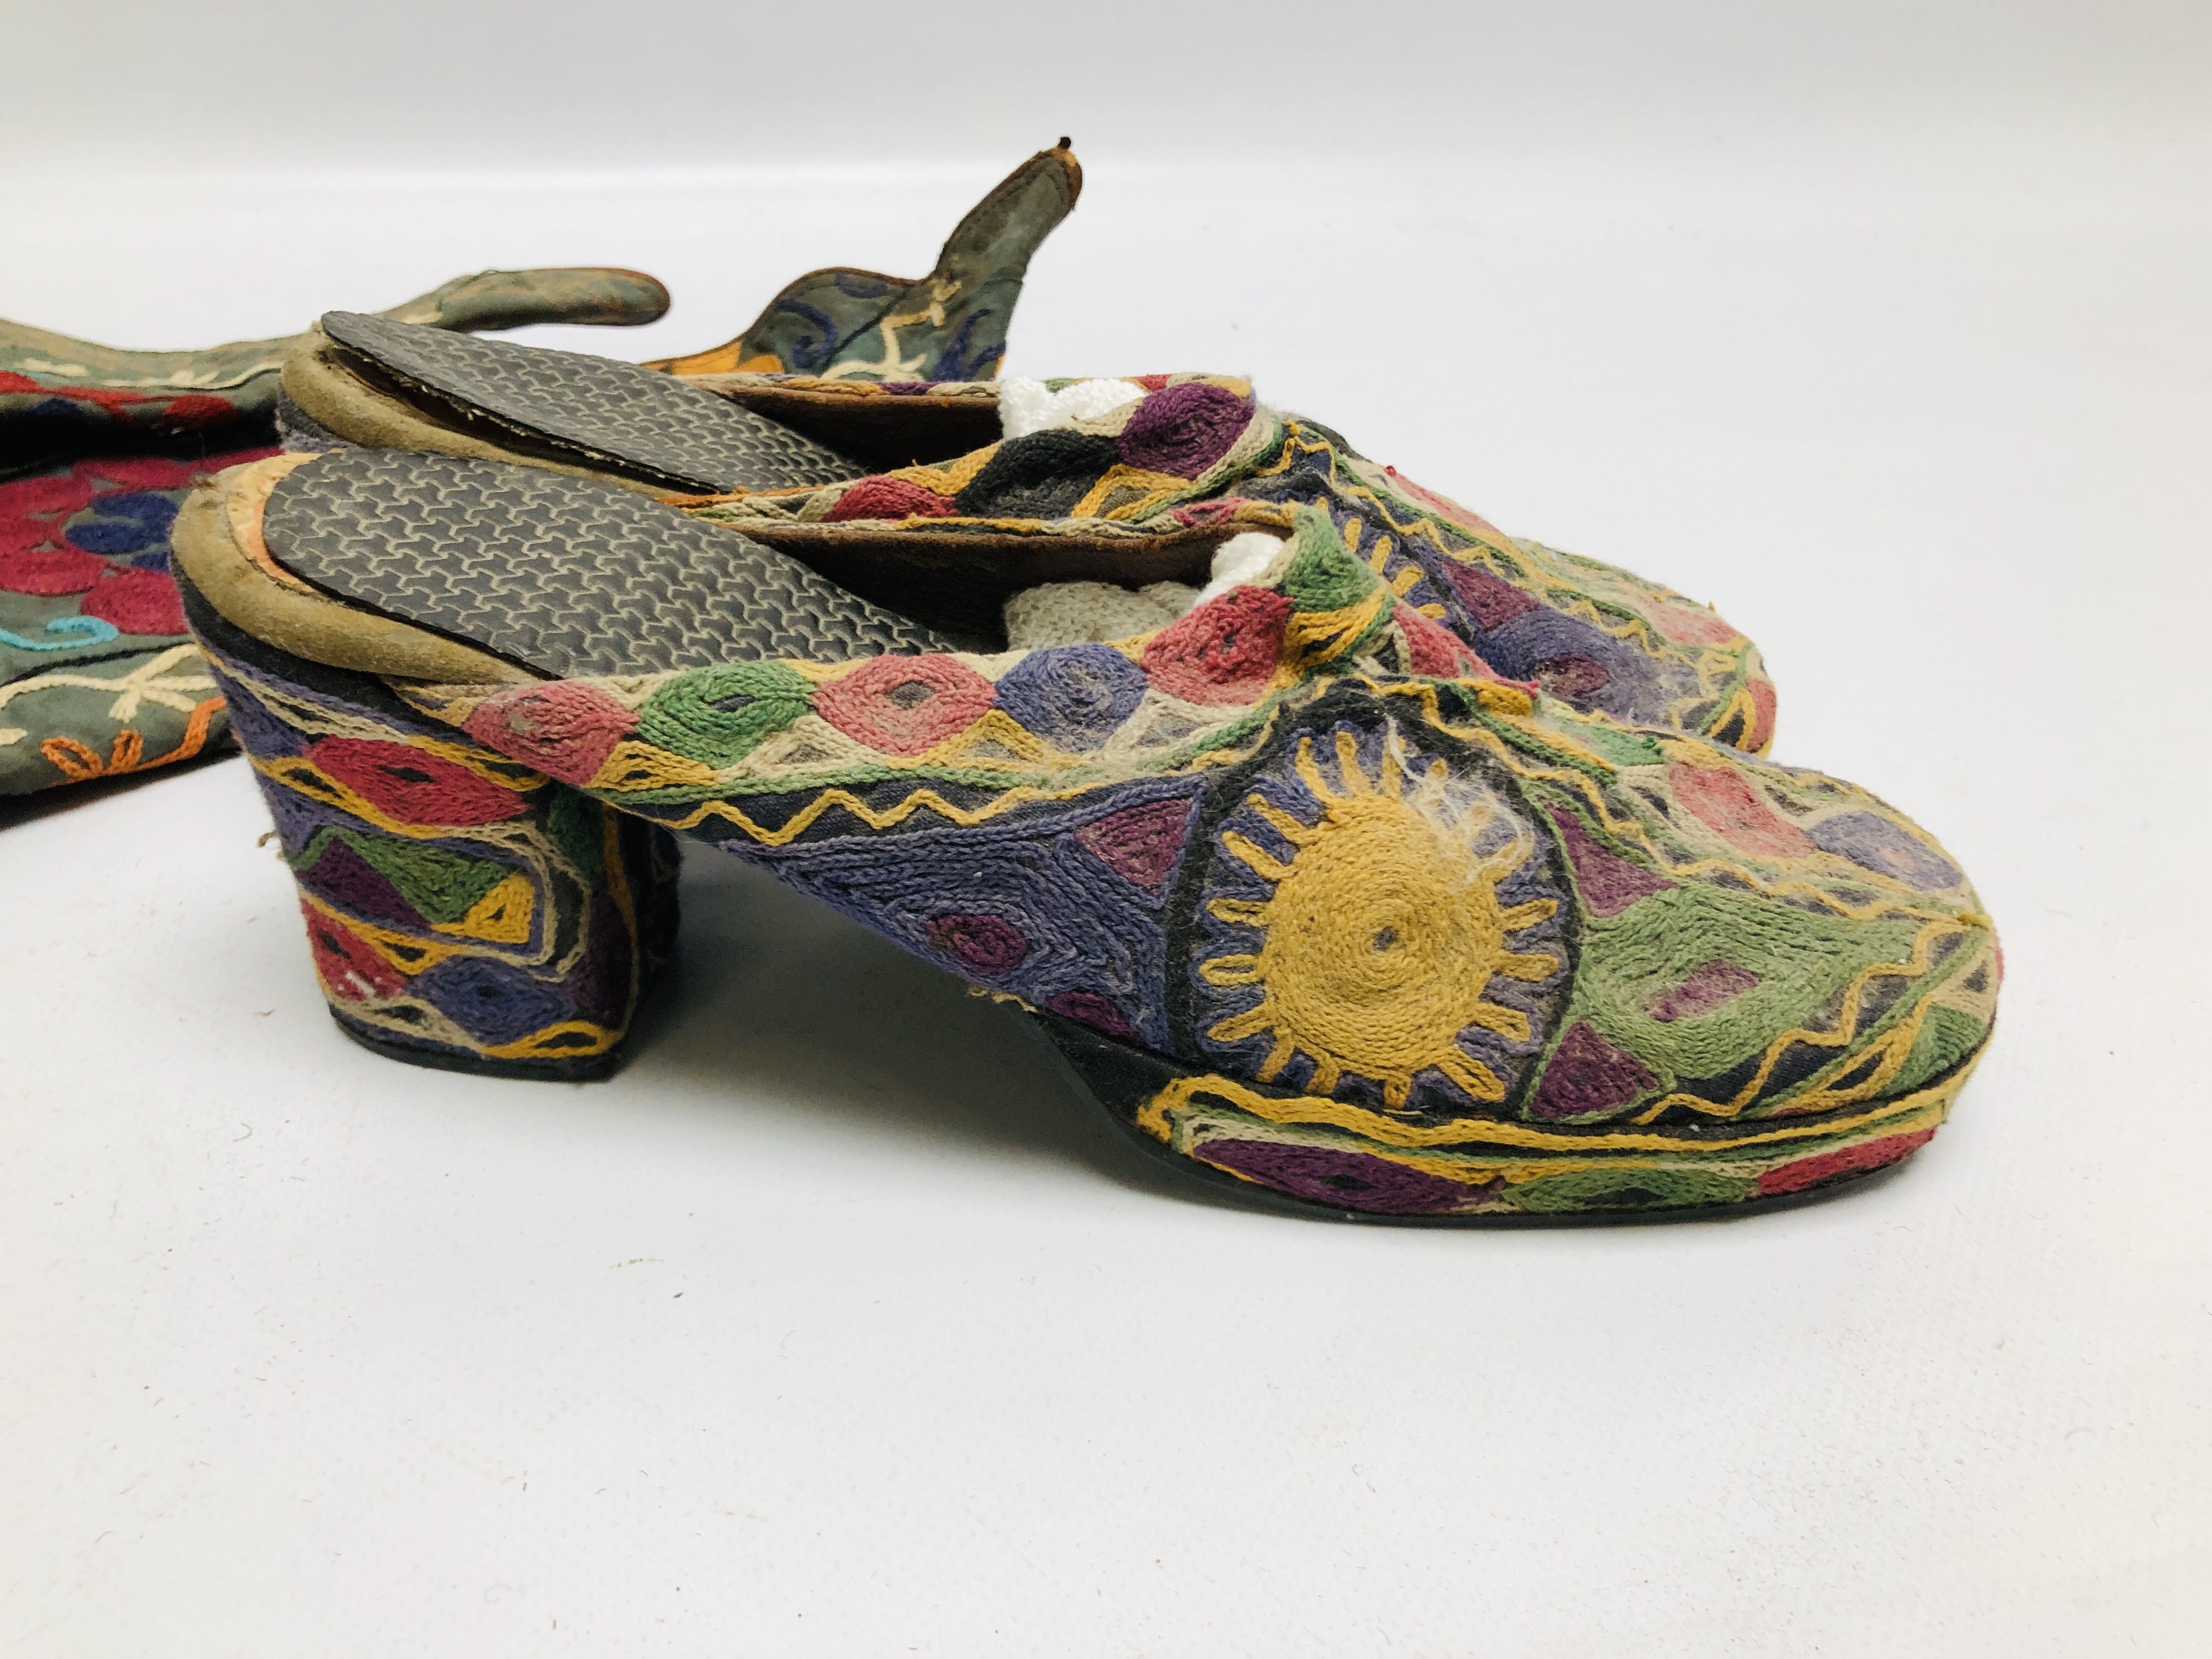 A PAIR OF MID C20TH AFGHAN EMBROIDERED SHOES ALONG WITH A PAIR OF EMBROIDERED BOOTS. - Image 2 of 10